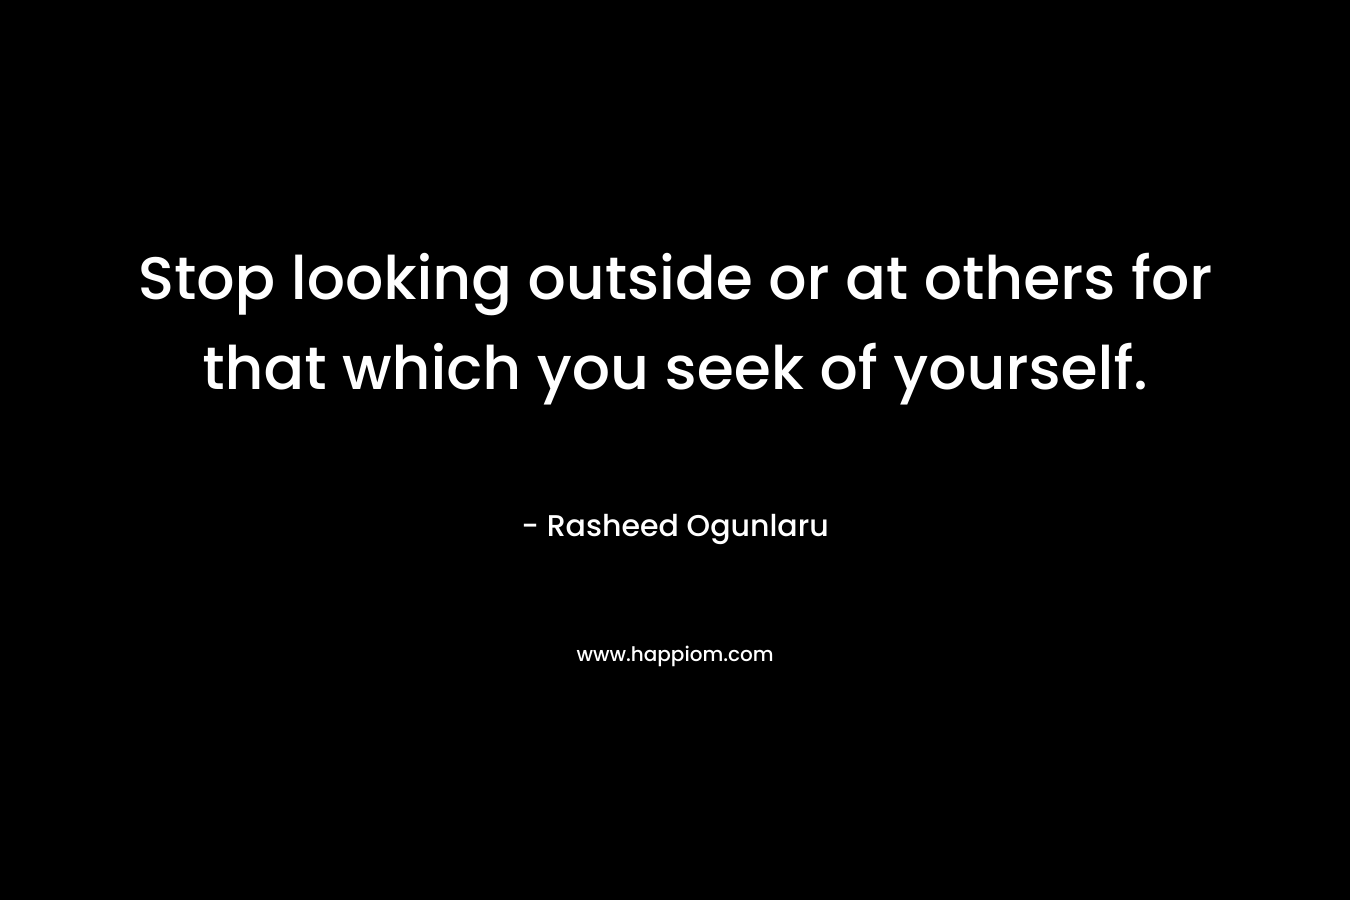 Stop looking outside or at others for that which you seek of yourself.